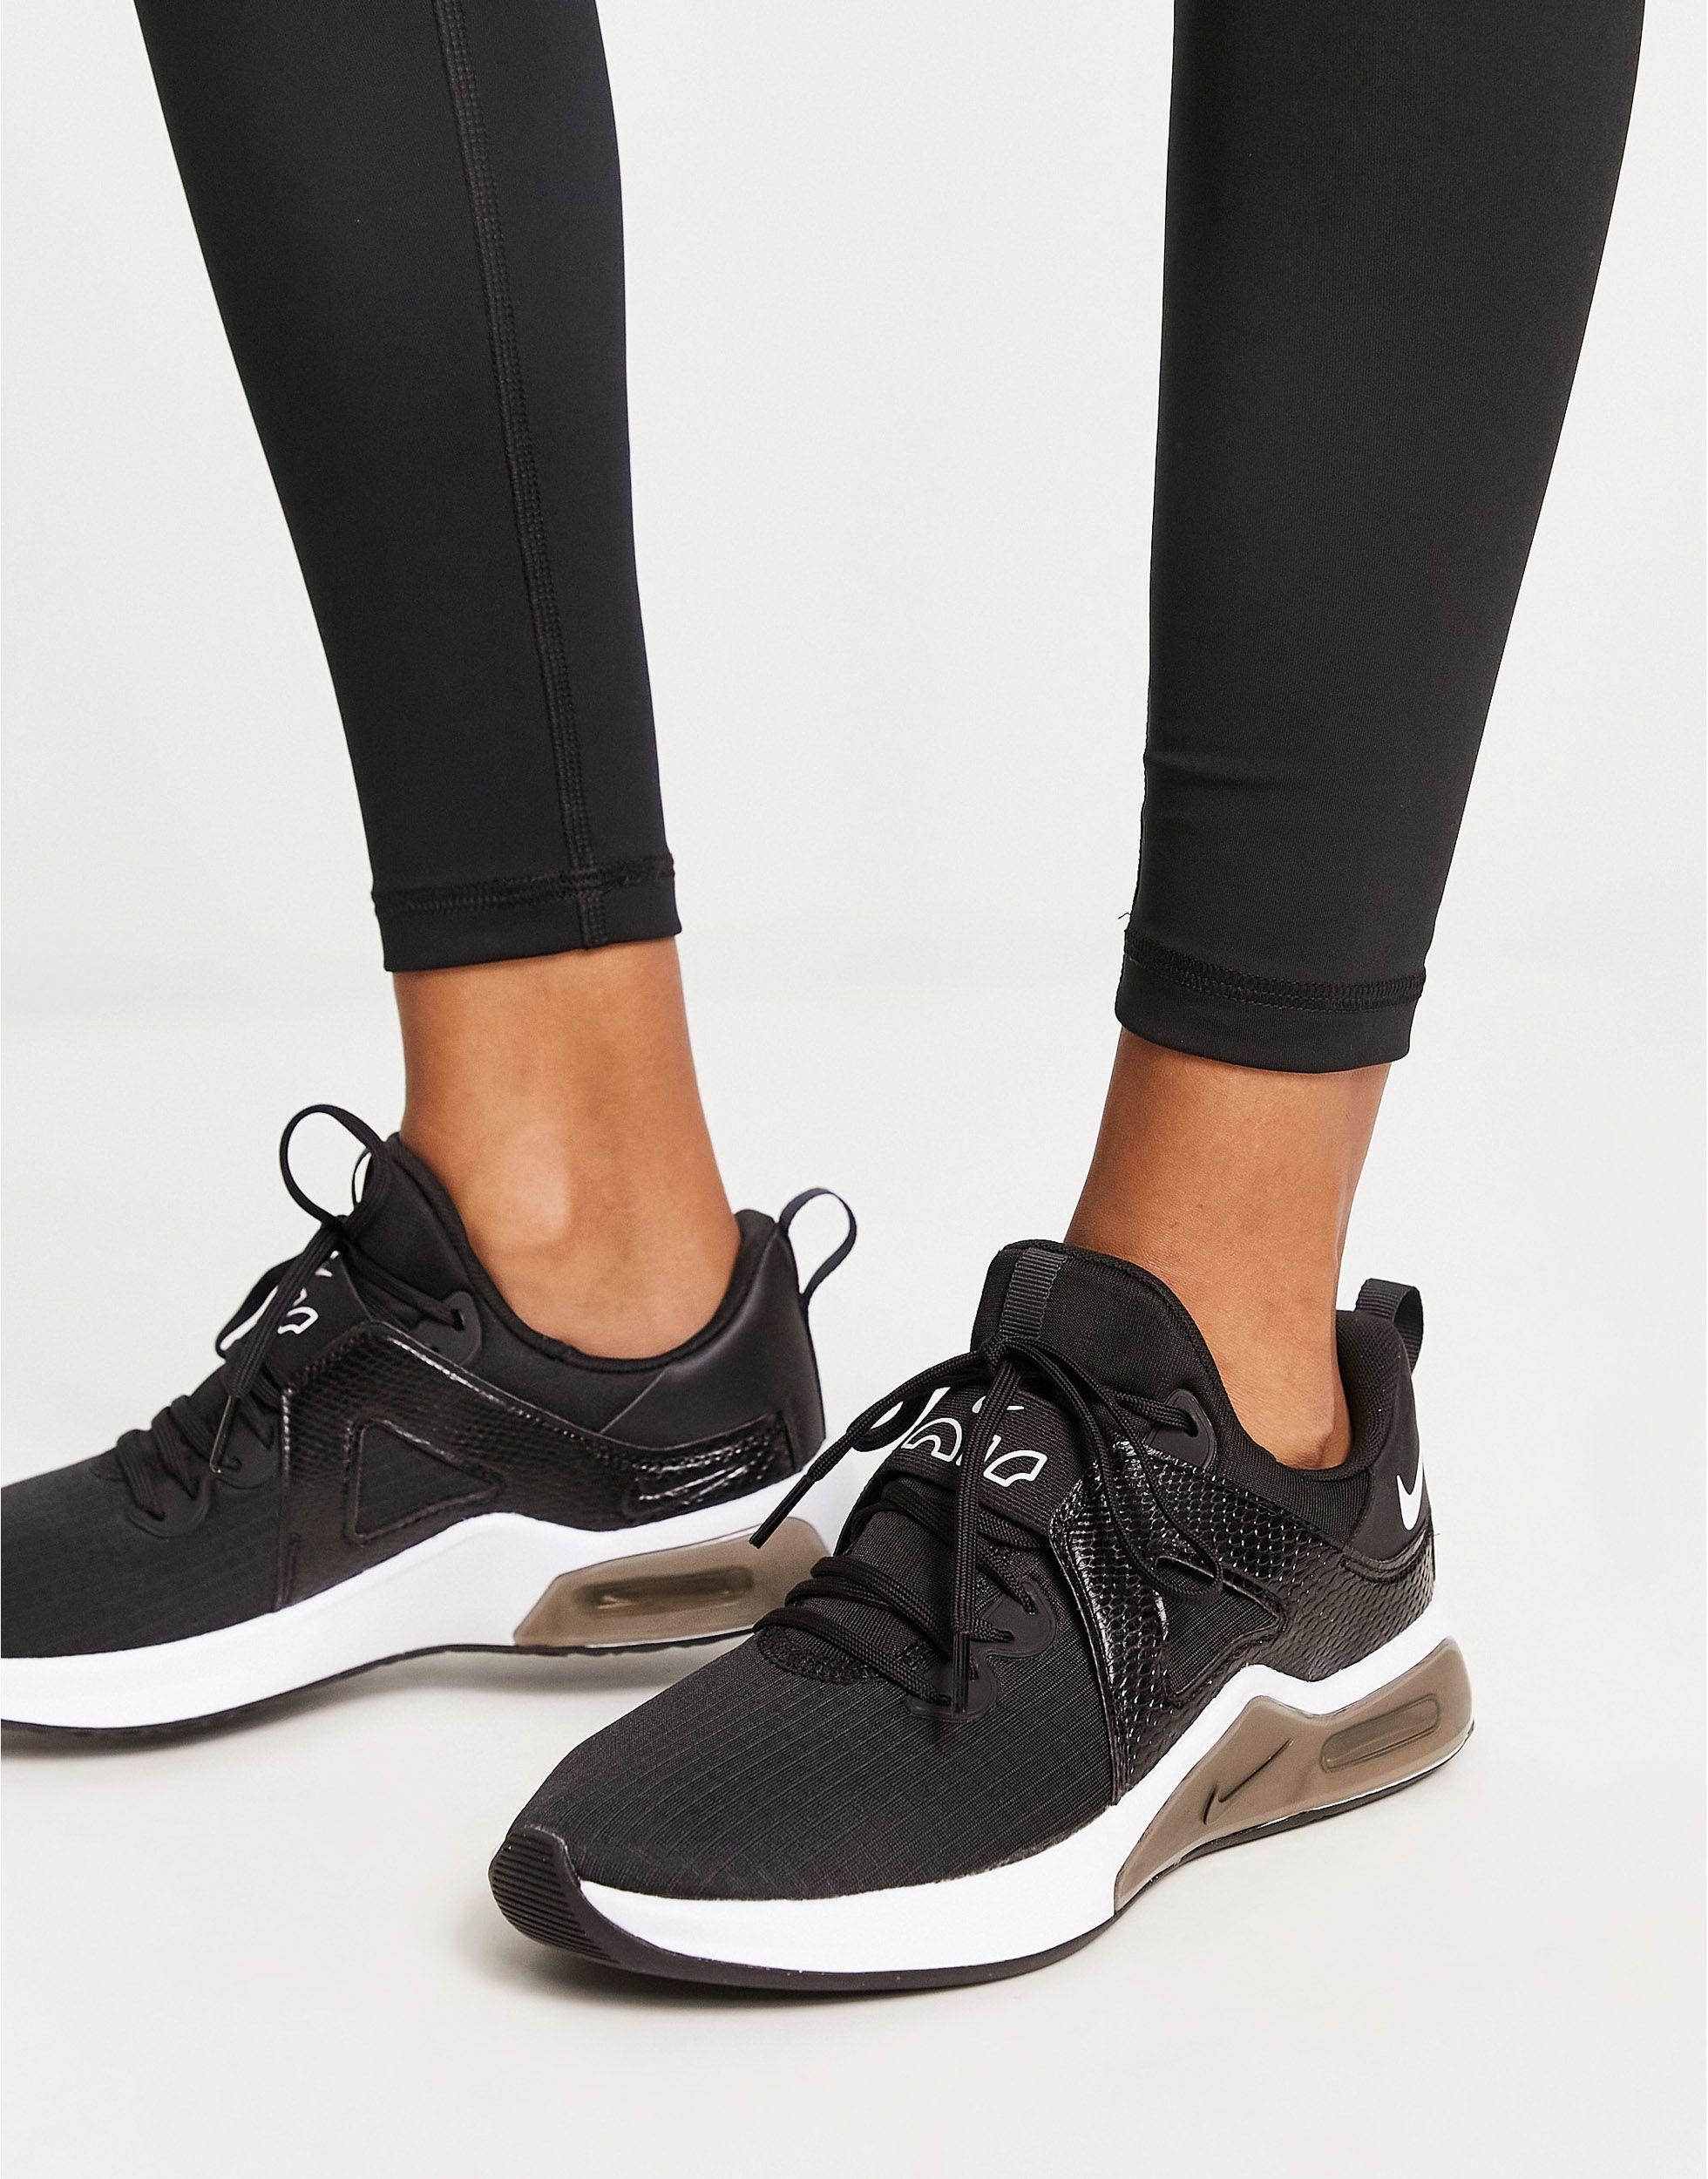 Overvind ophobe hende Nike Air Max Bella Tr 5 Trainers in Black | Lyst